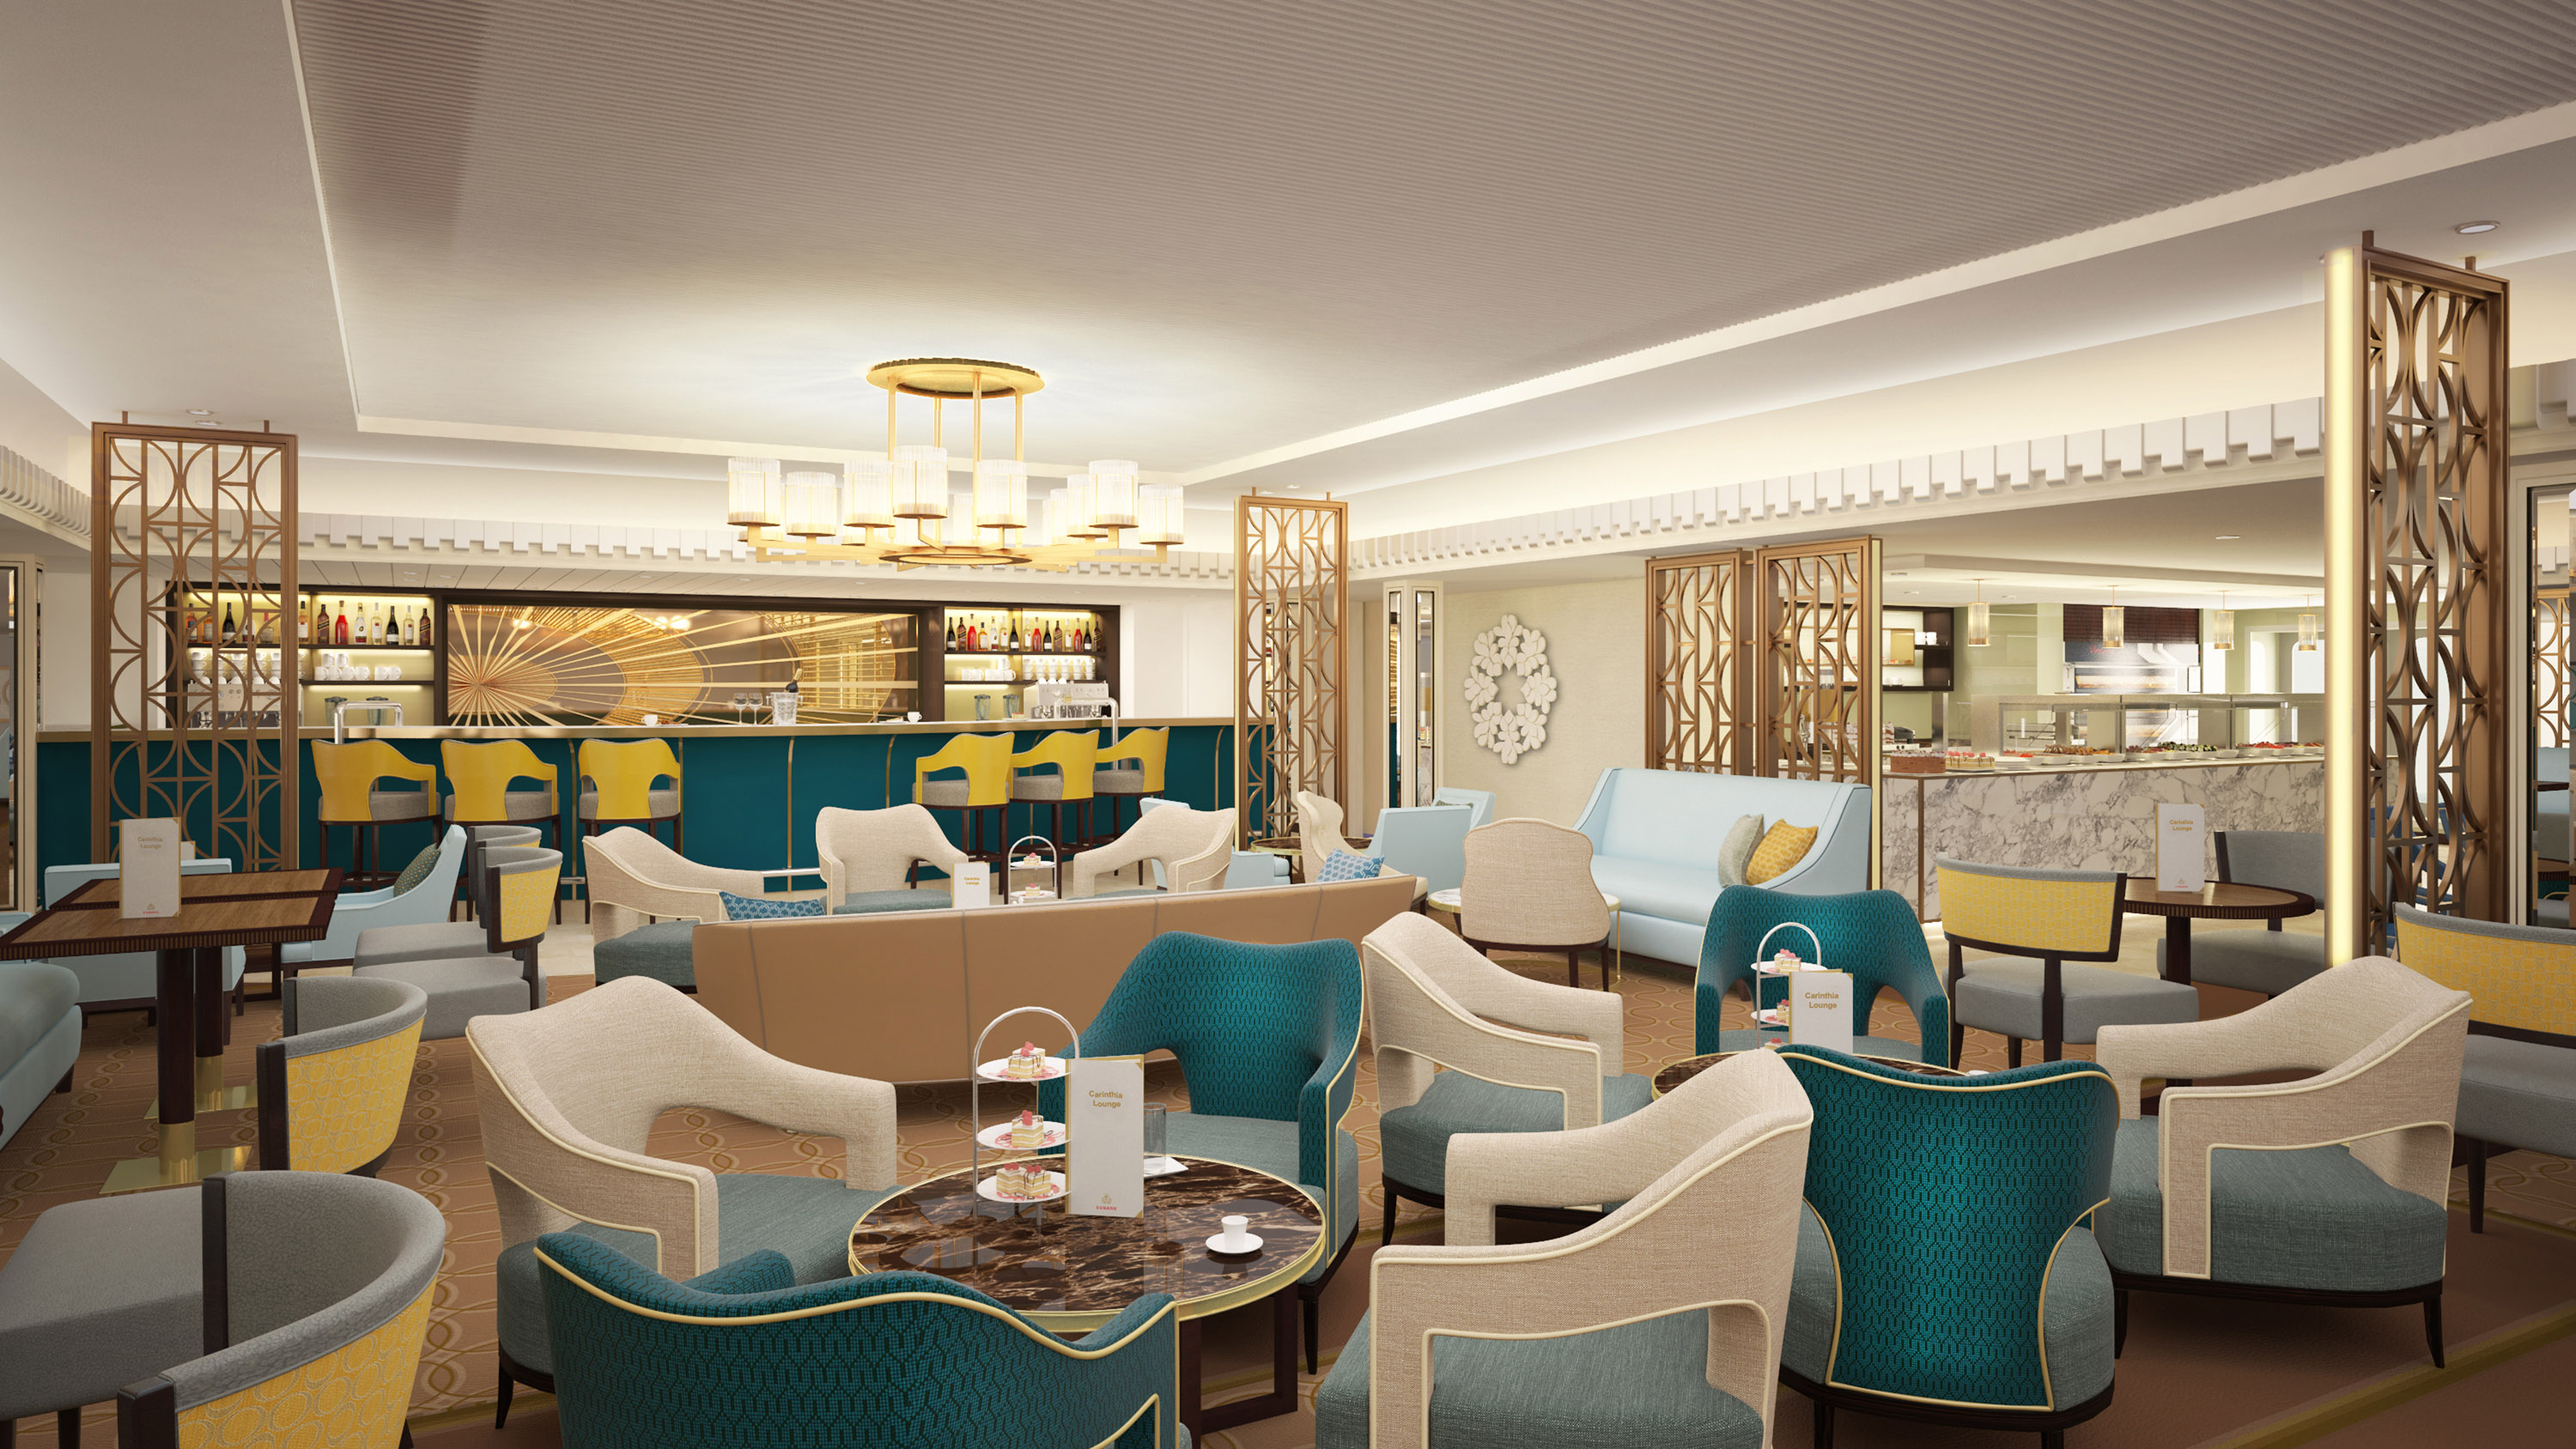 Carinthia Lounge Queen Mary 2 rendering